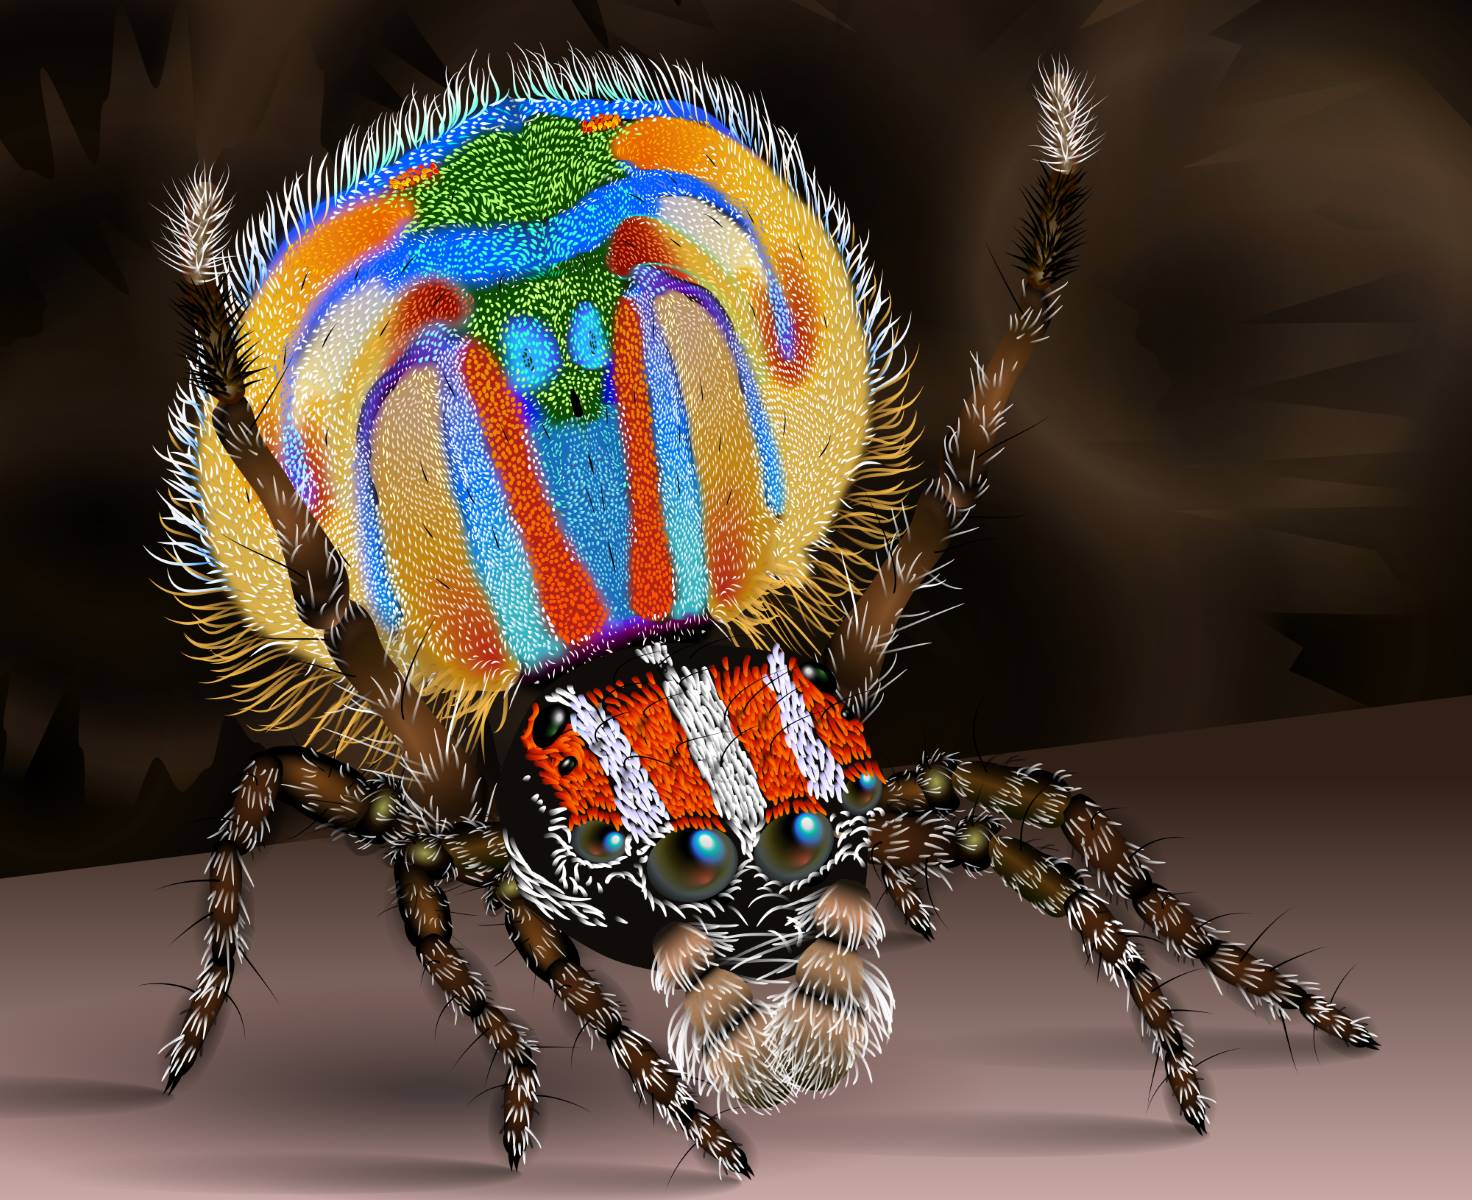 18 Unbelievable Facts About Peacock Spider - Facts.net